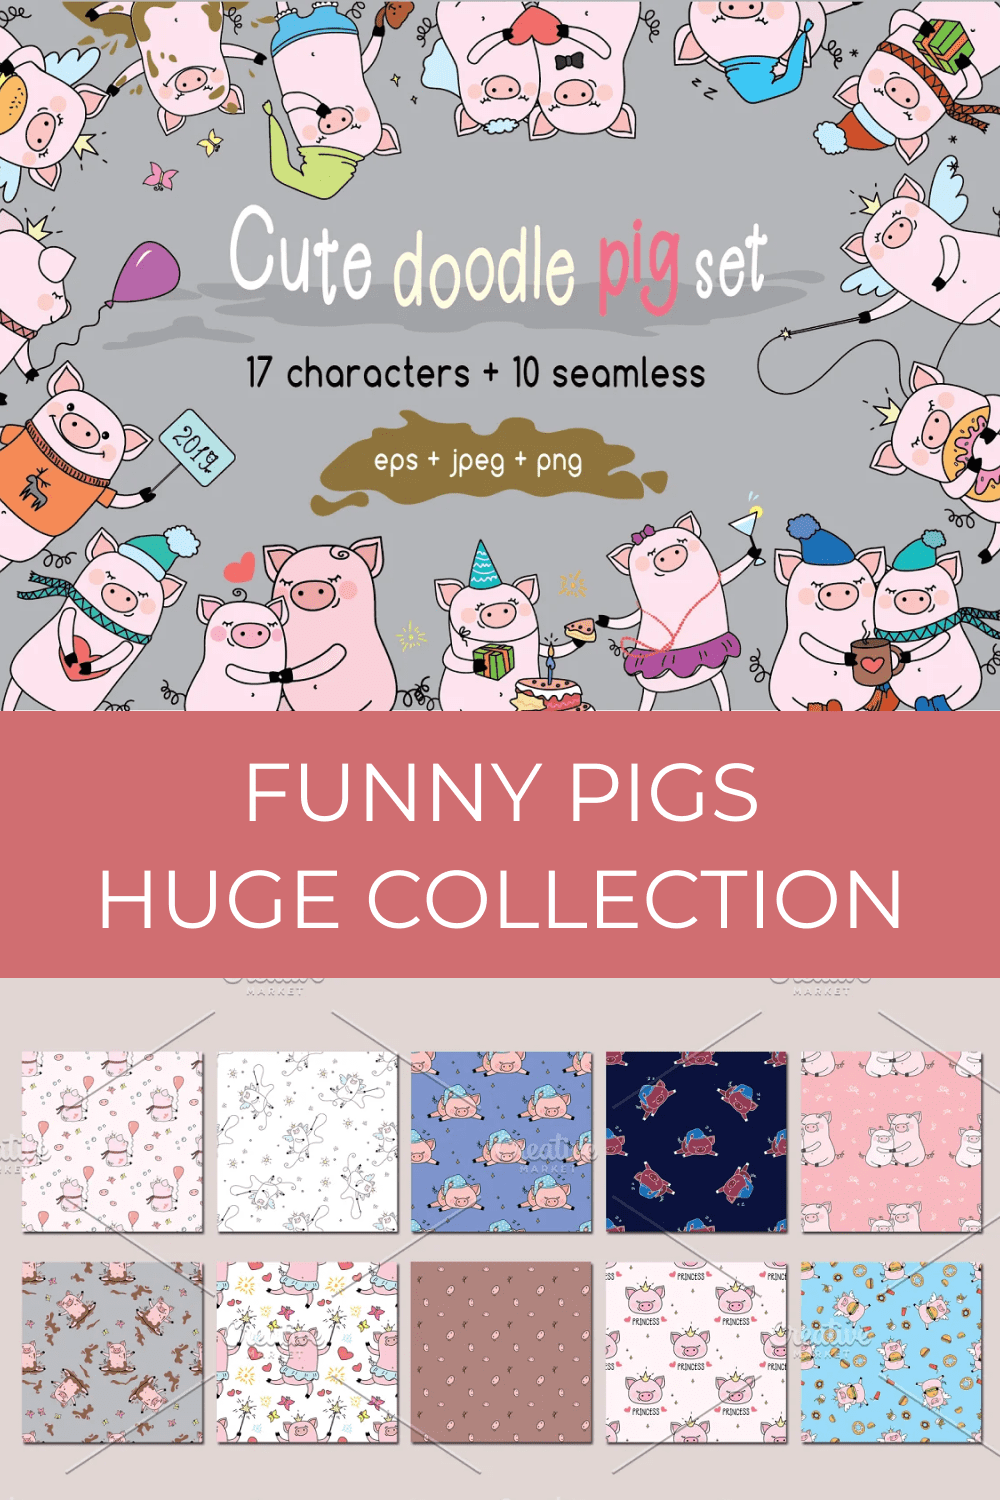 Funny Pigs Huge Collection.